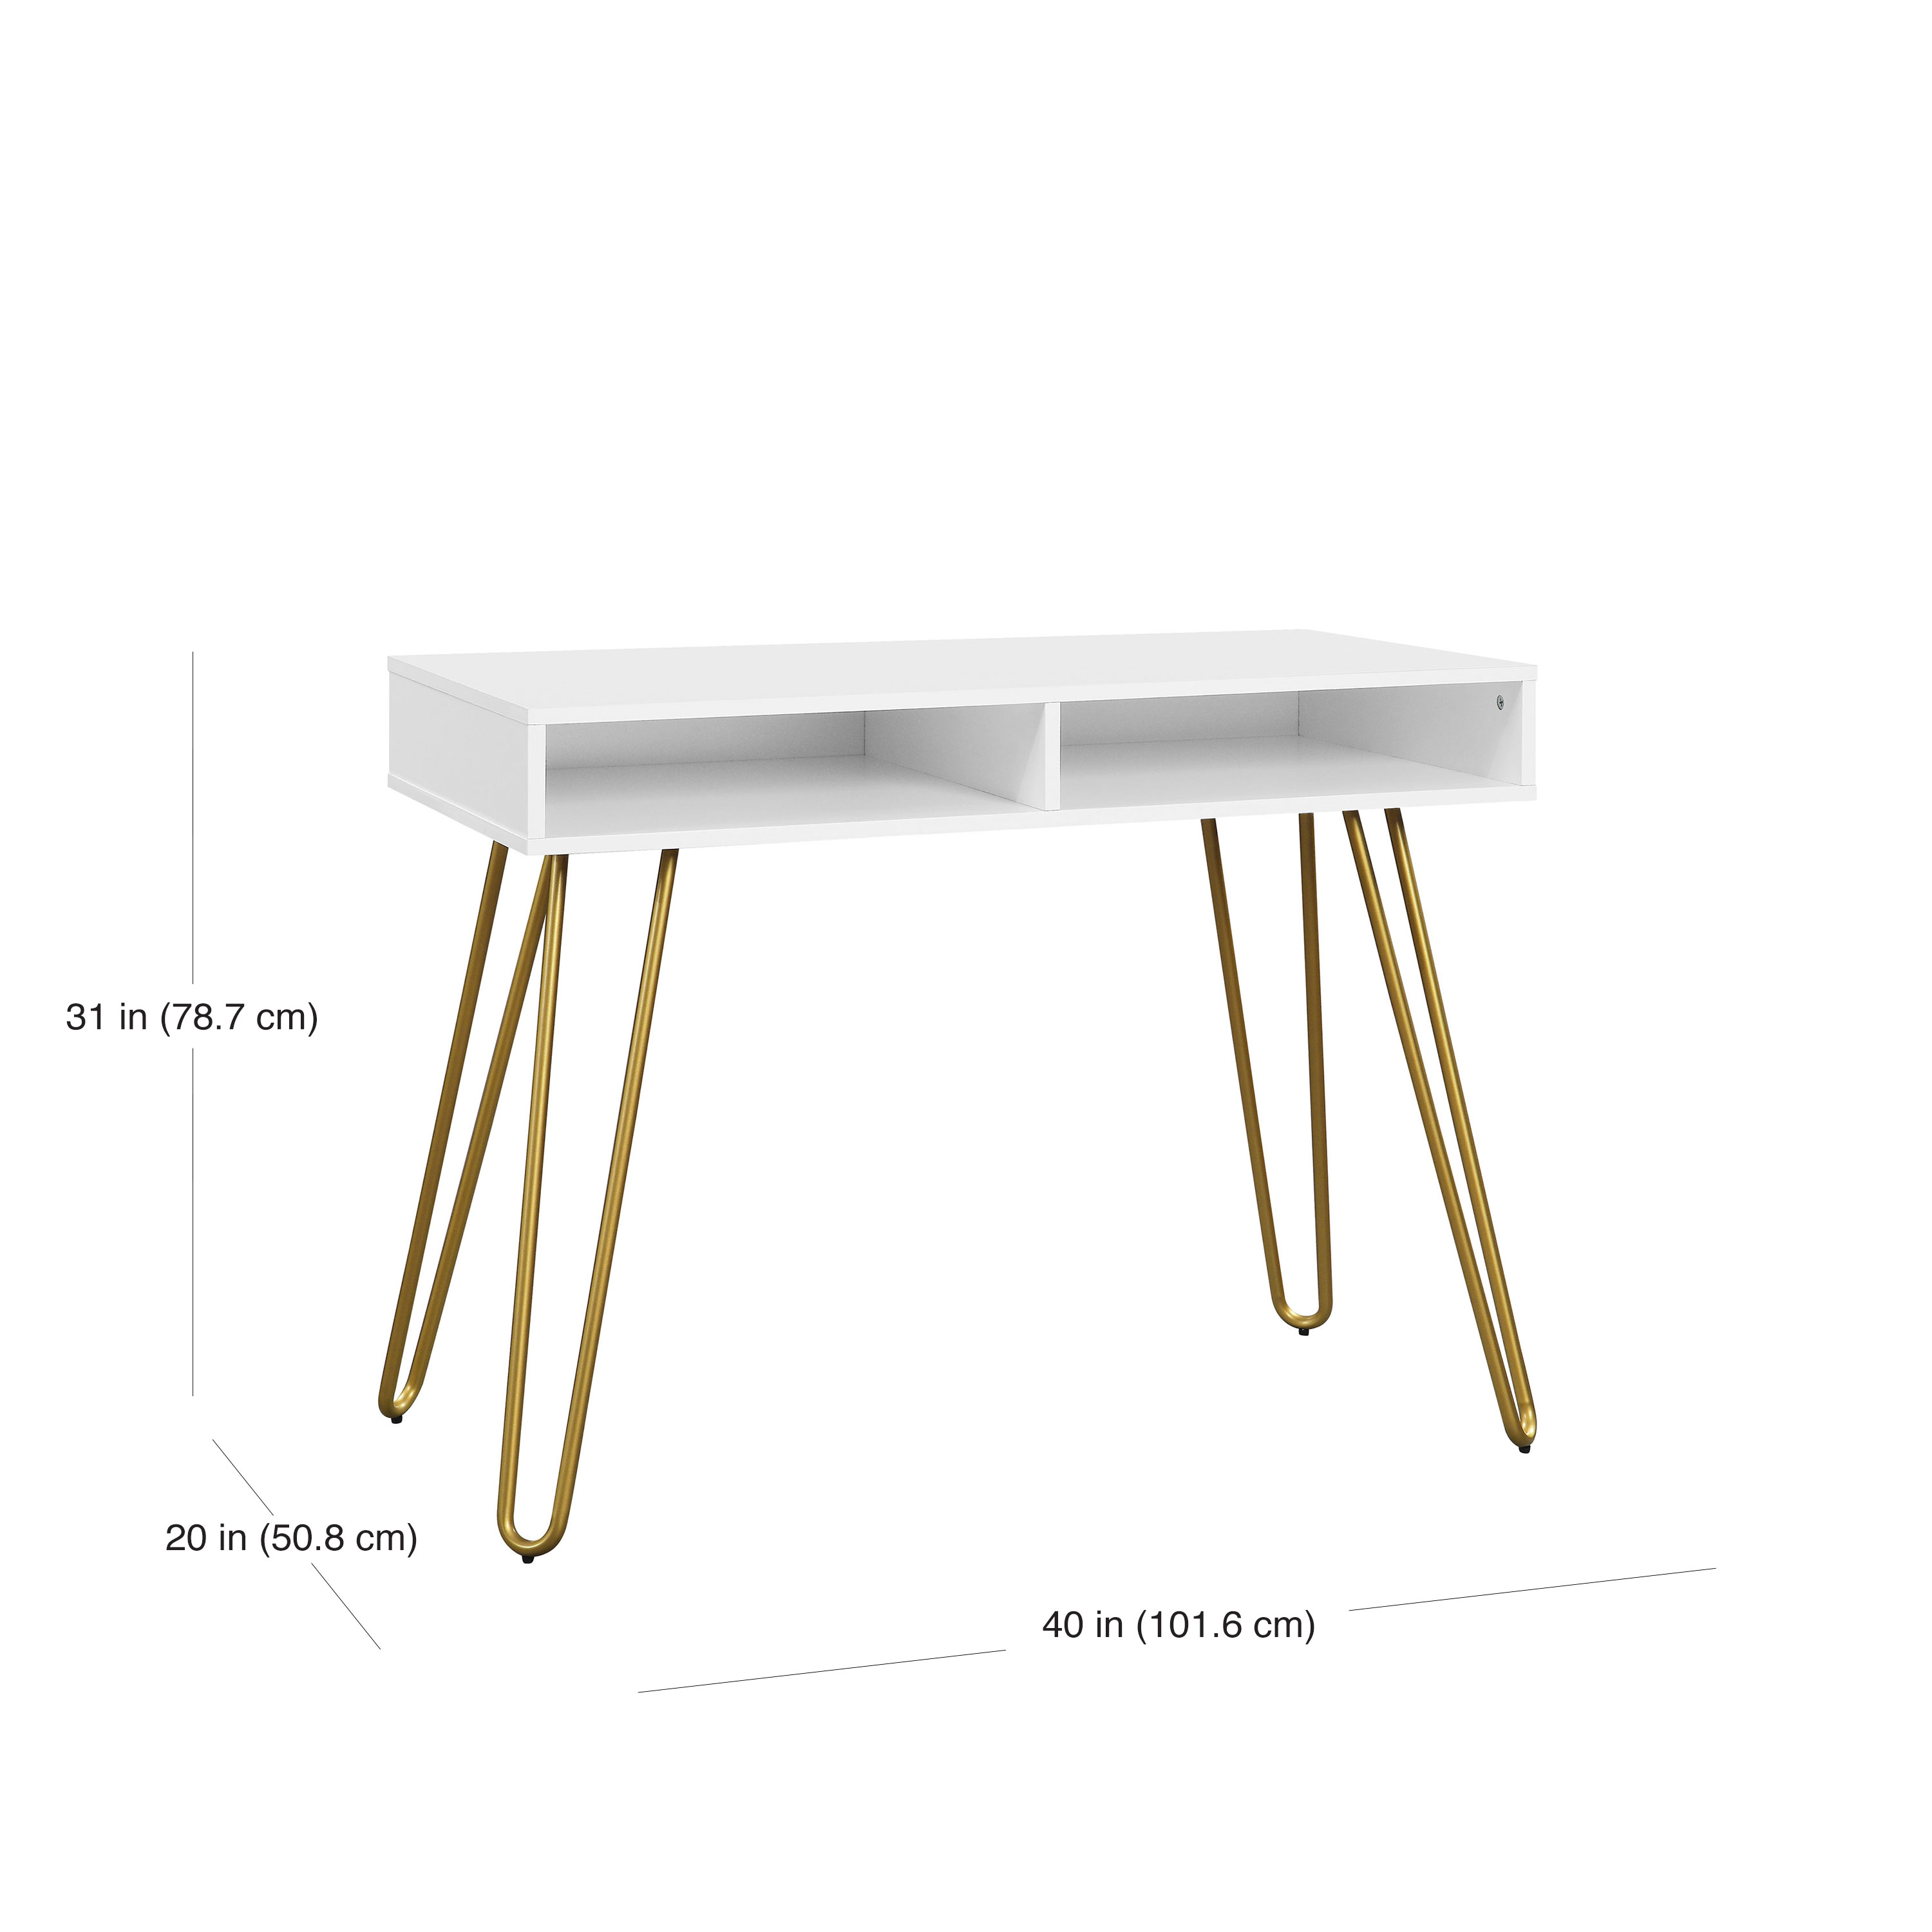 Mainstays Hairpin Writing Desk, Multiple Finishes - image 3 of 10